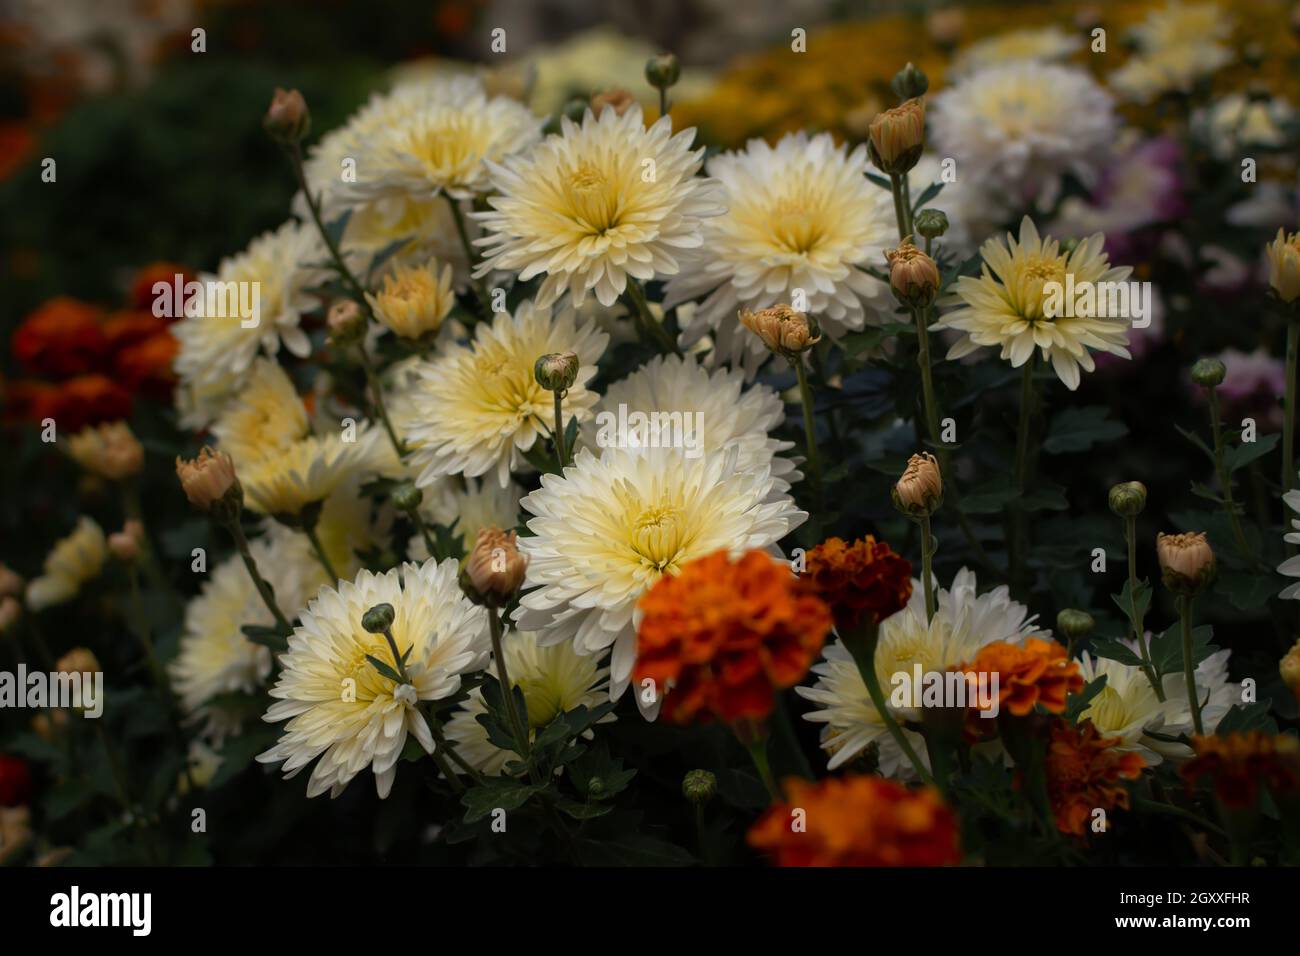 Chrysanthemum garden. White autumn flowers among orange ones in a flower bed. Beautiful delicate chrysanthemums bloomed in the park. Soft focus, dimme Stock Photo